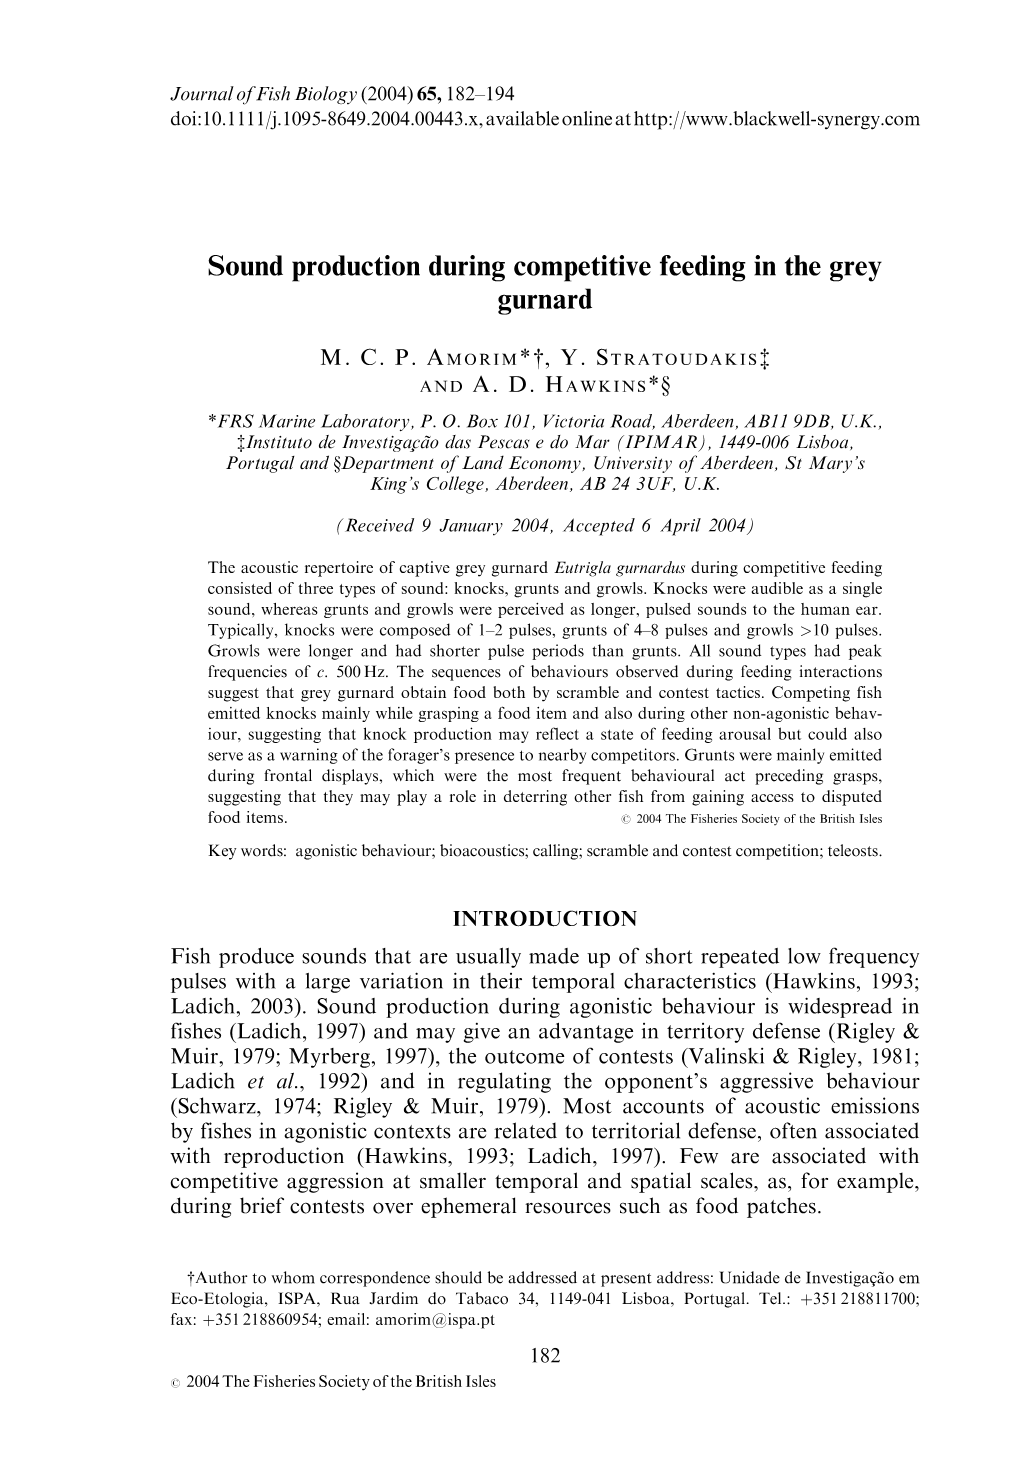 Sound Production During Competitive Feeding in the Grey Gurnard